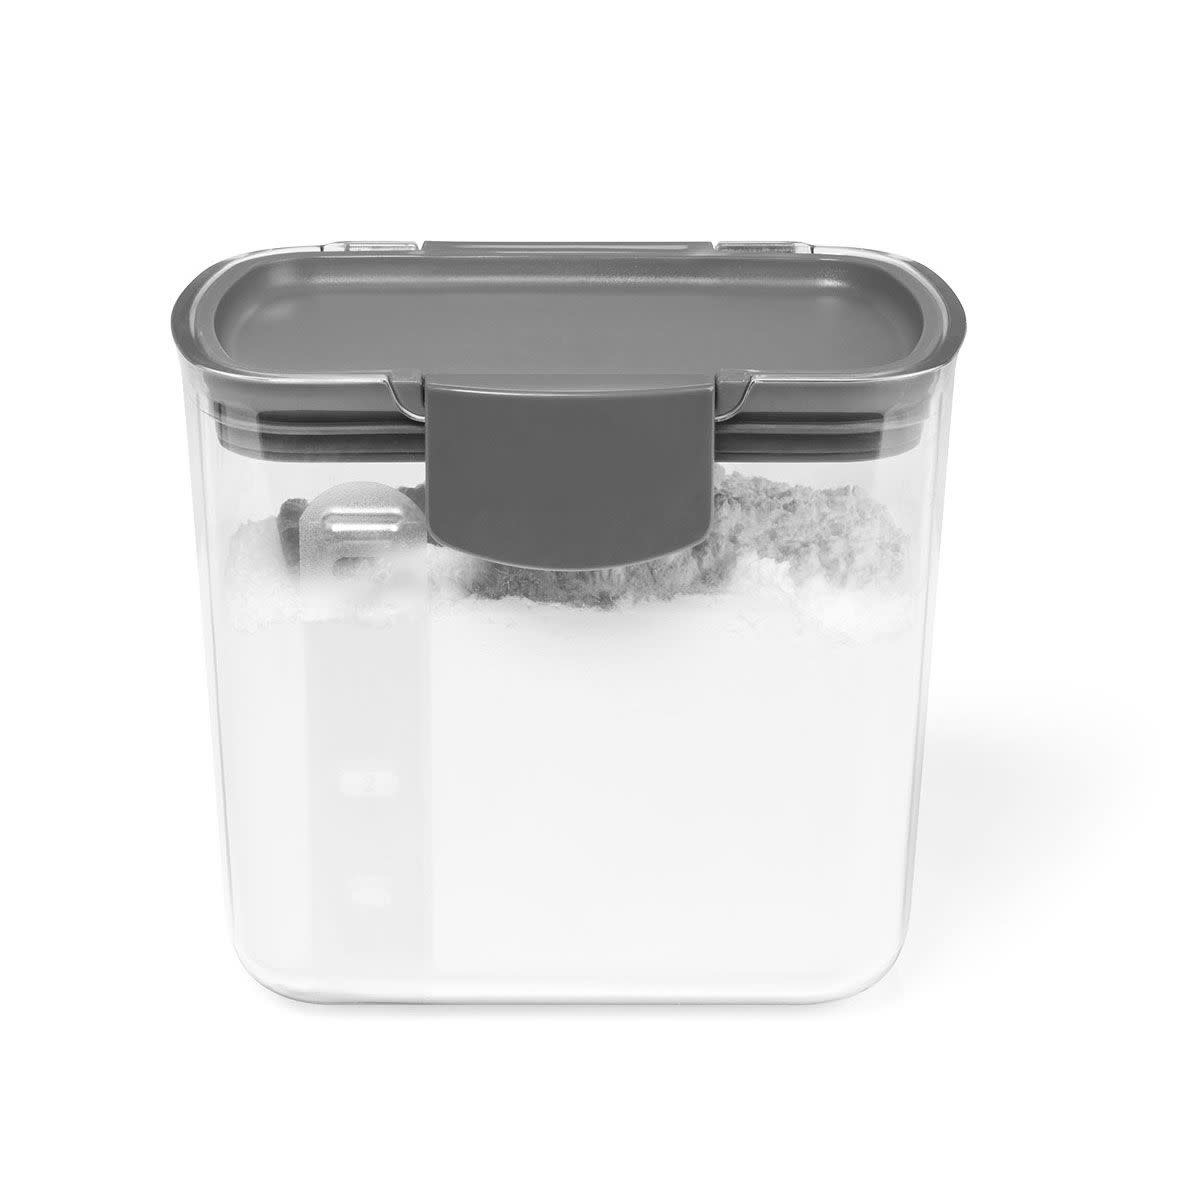  KD Home Flour and Sugar Storage Containers. 2 Extra Large  Original Airtight Canister for Sugar, Flour, Cereal, Rice, Baking Supplies,  Dry Food Storage Containers with Lids [175 oz.]: Home & Kitchen